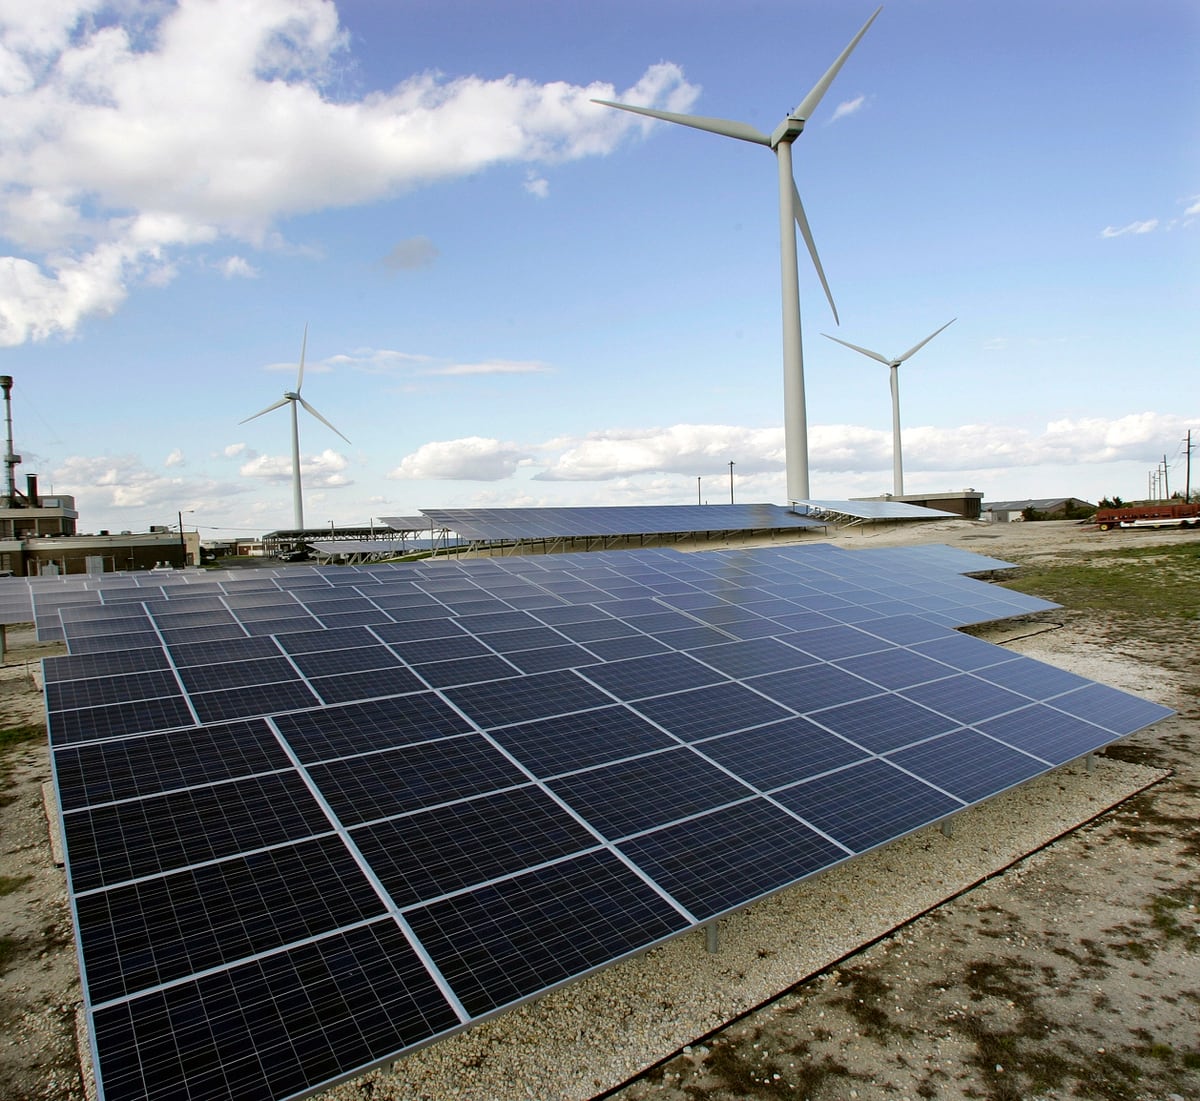 Fort Hood gets solar, wind farms in Army's largest energy project